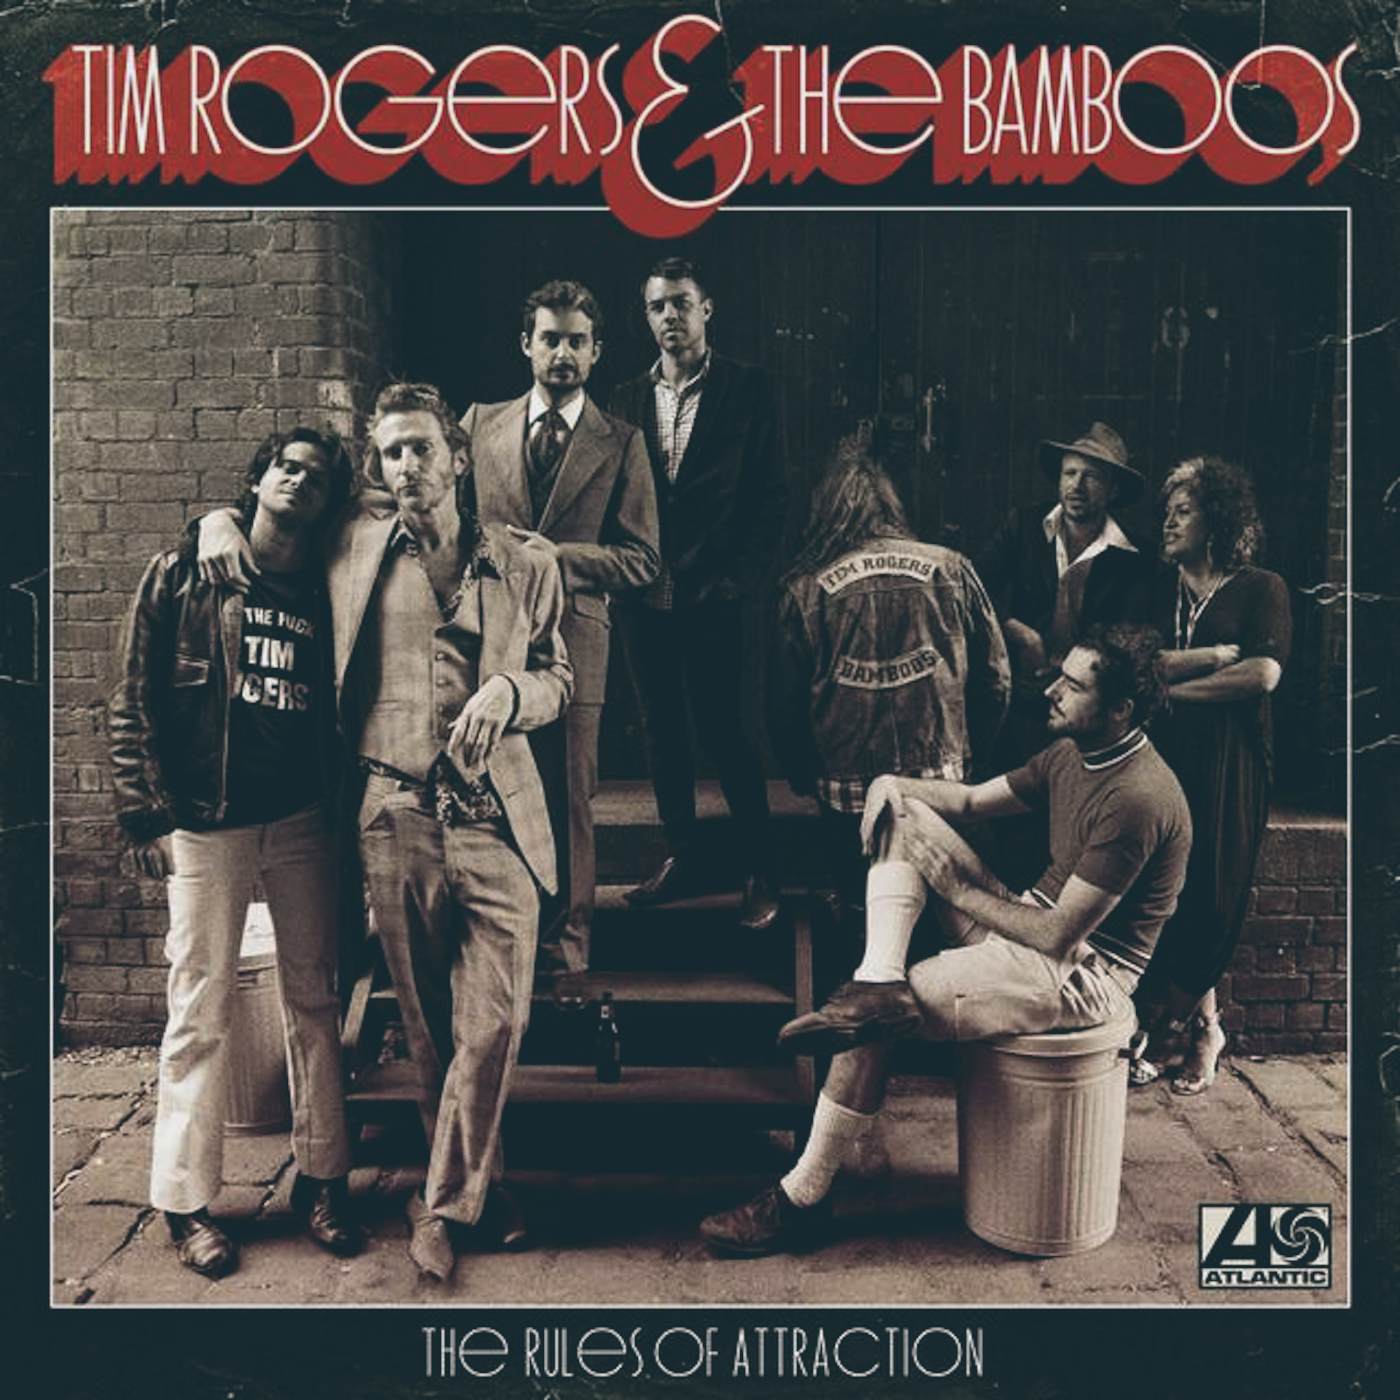 Tim Rogers & the Bamboos